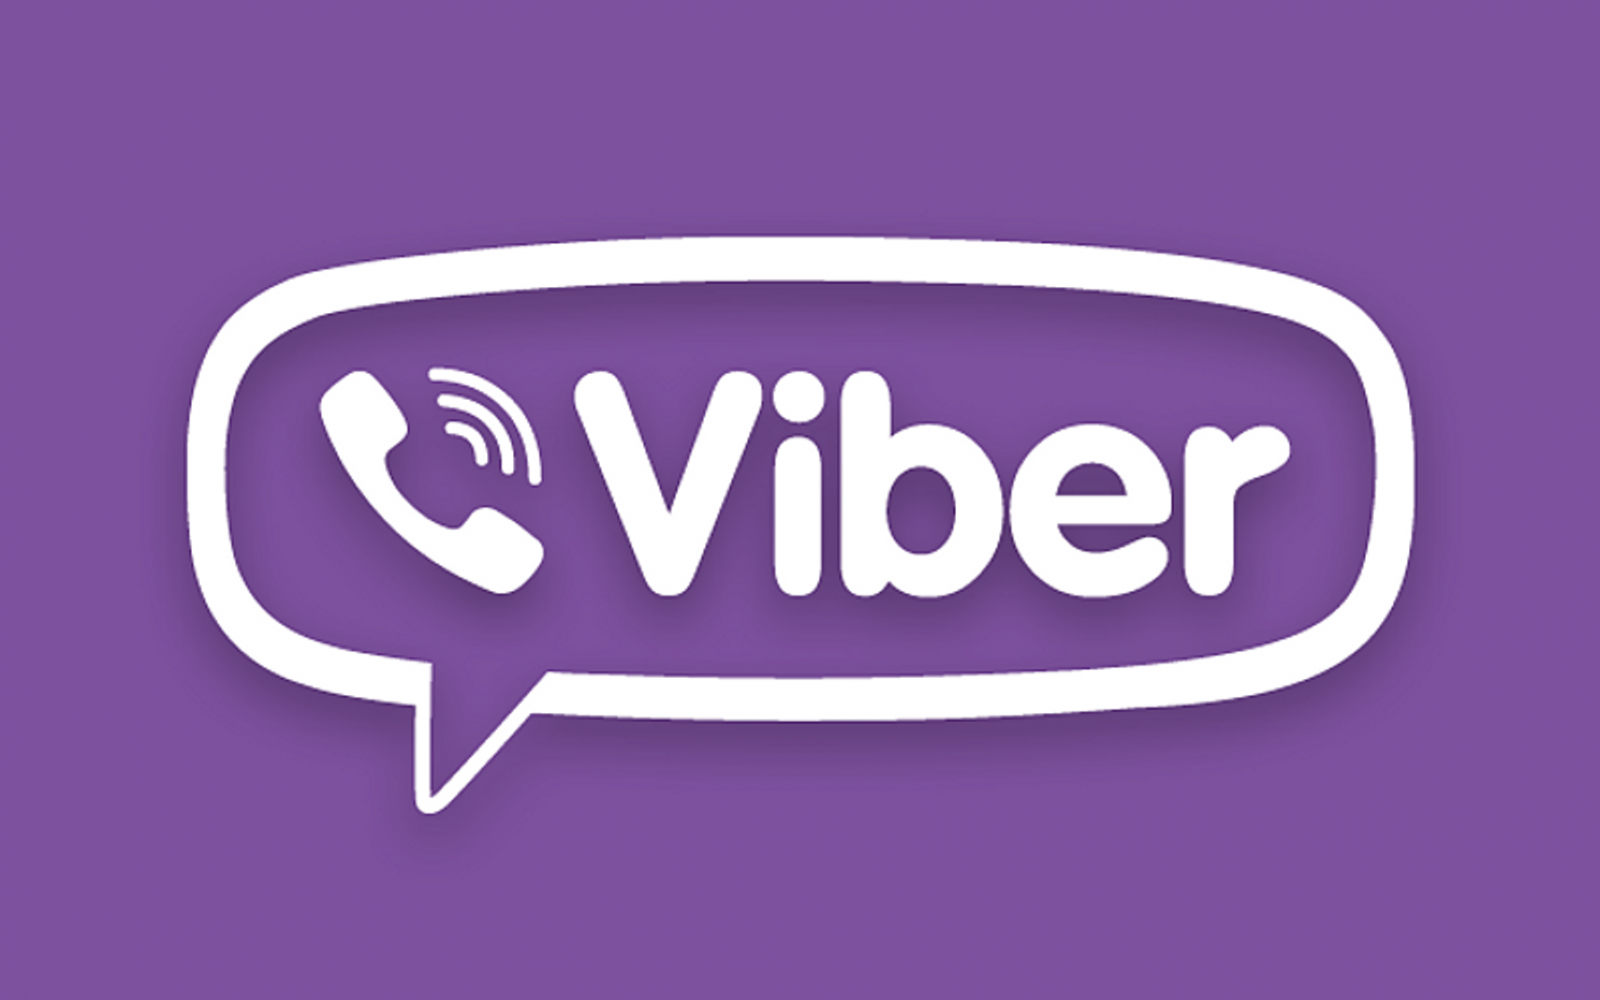 viber-follows-apples-lead-with-end-to-end-encryption-image-cultofandroidcomwp-contentuploads201604Viber-Logo-png